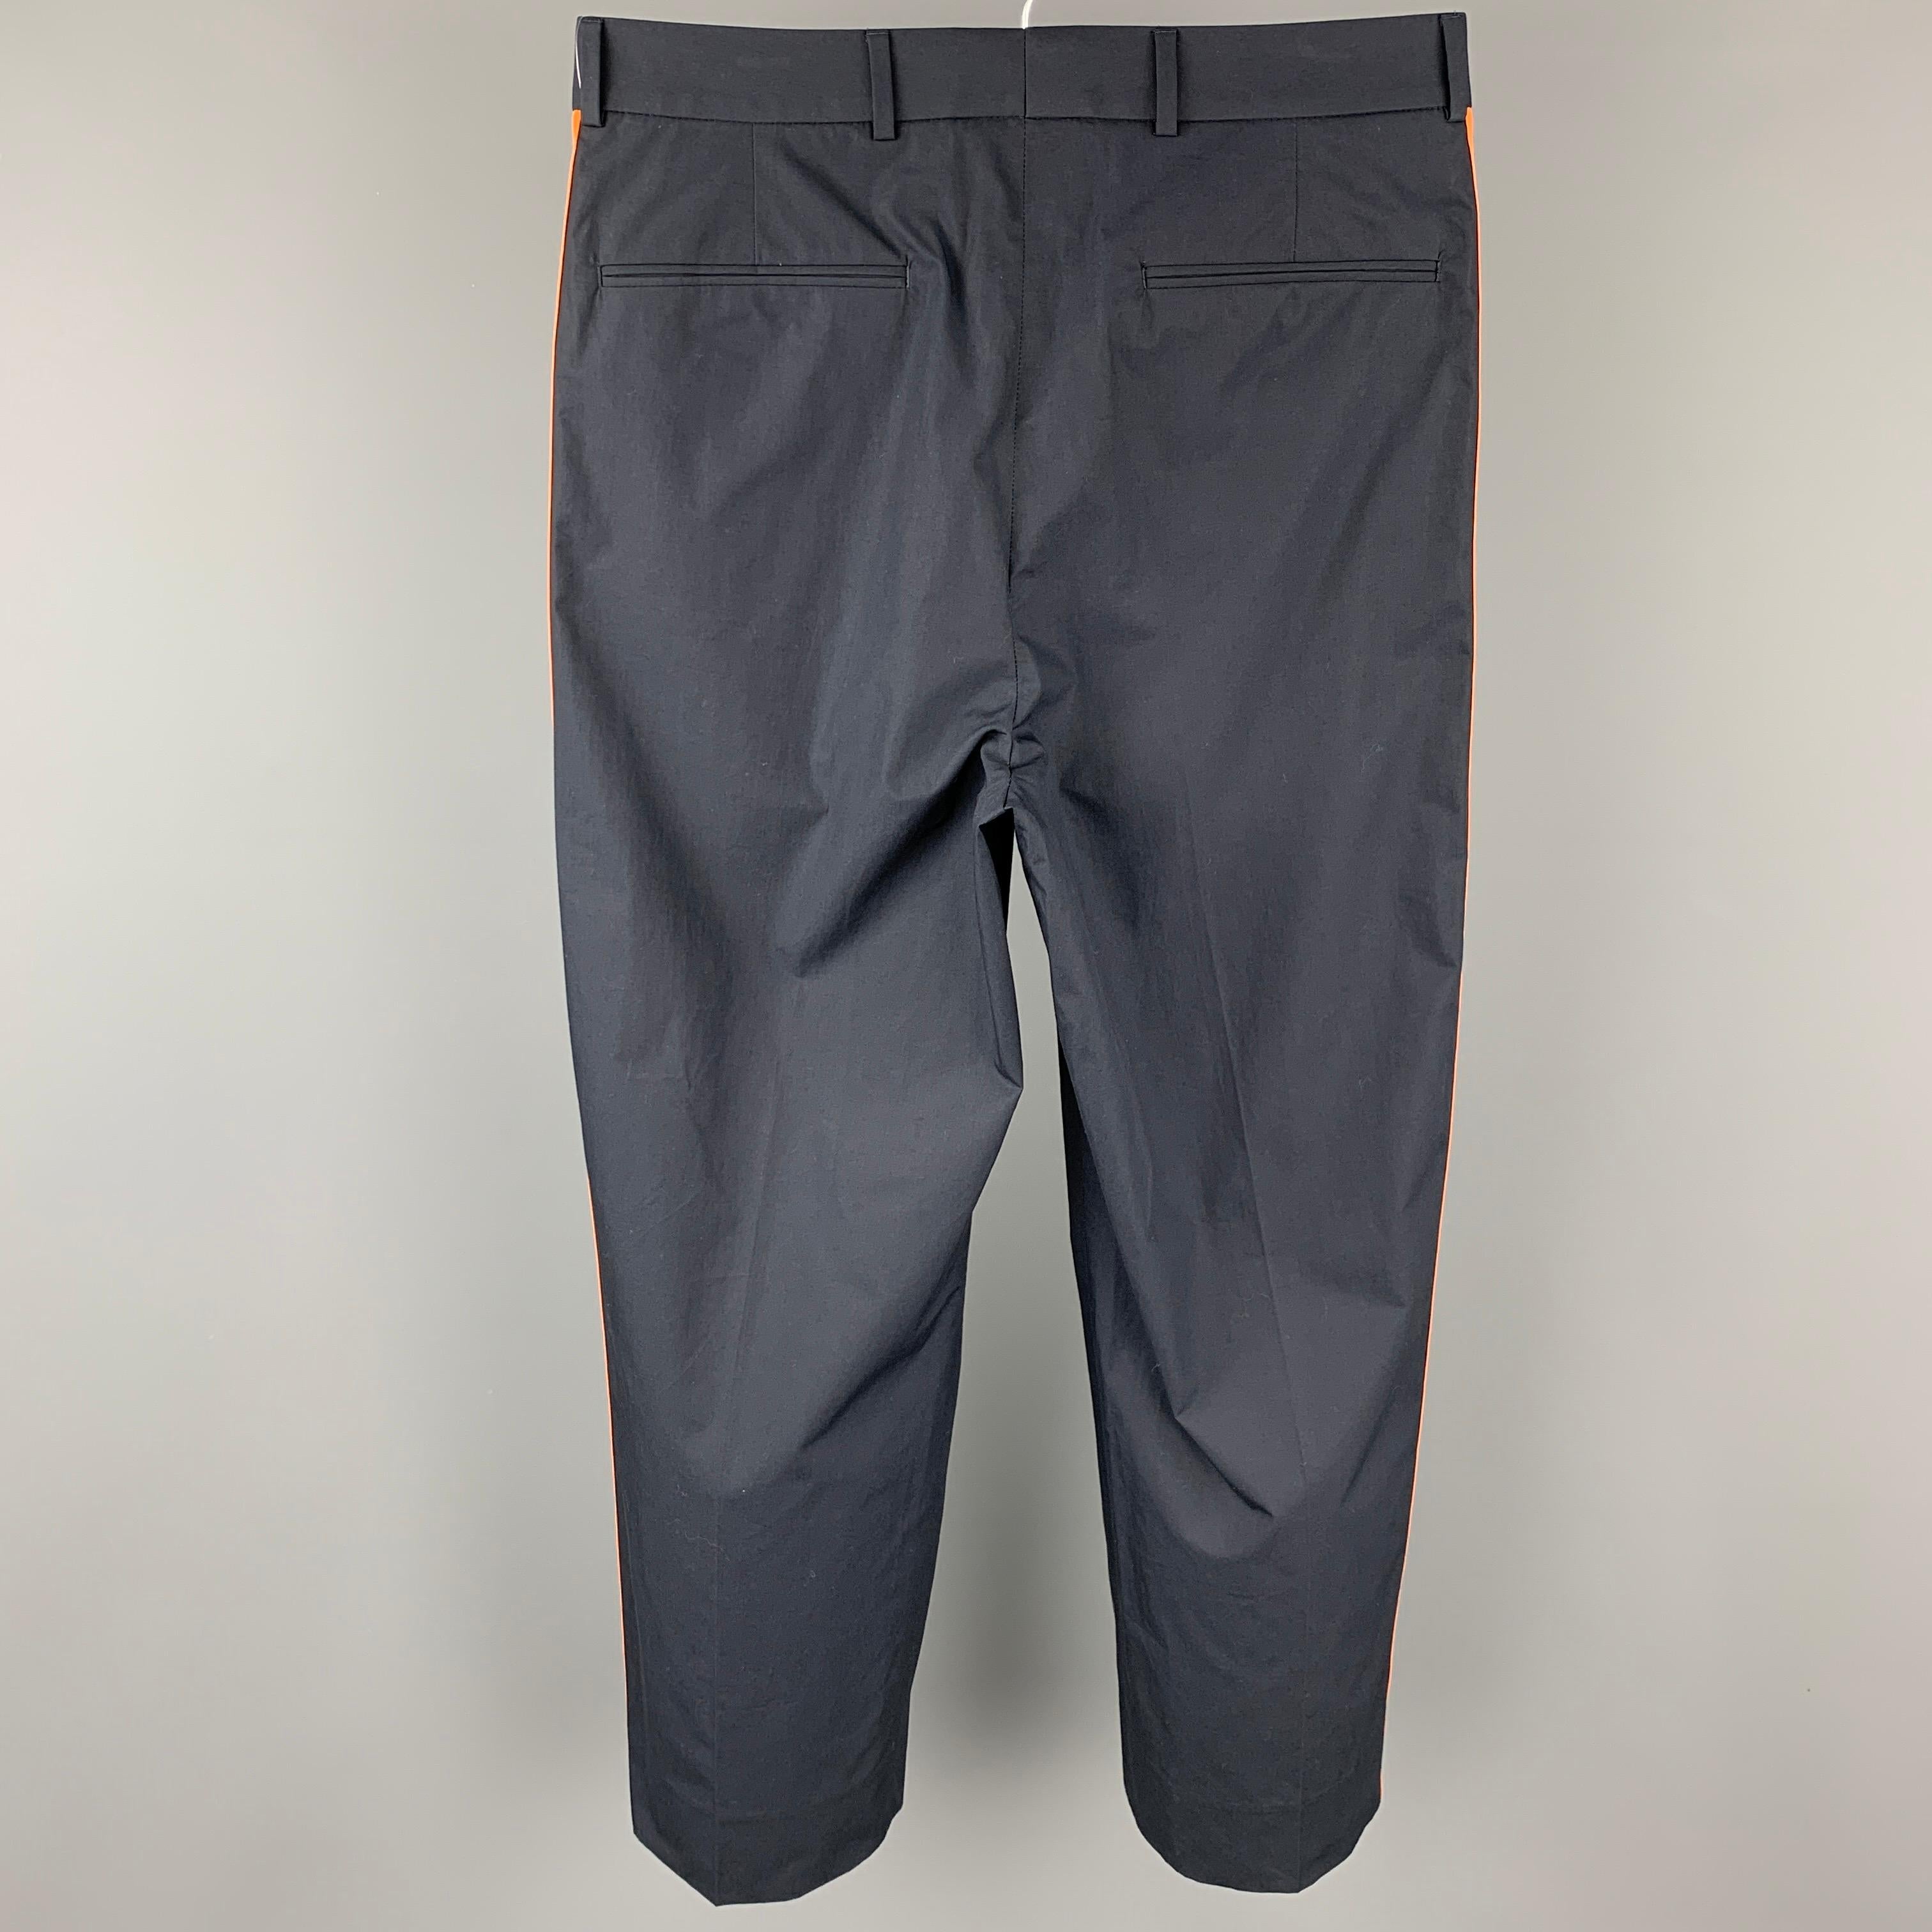 VALENTINO dress pants comes in a navy cotton with a orange stripe trim featuring a pleated style, slit pockets, front tab, and a zip fly closure. Made in Italy.

New With Tags. 
Marked: IT 46

Measurements:

Waist: 31 in.
Rise: 12 in.
Inseam: 26 in. 